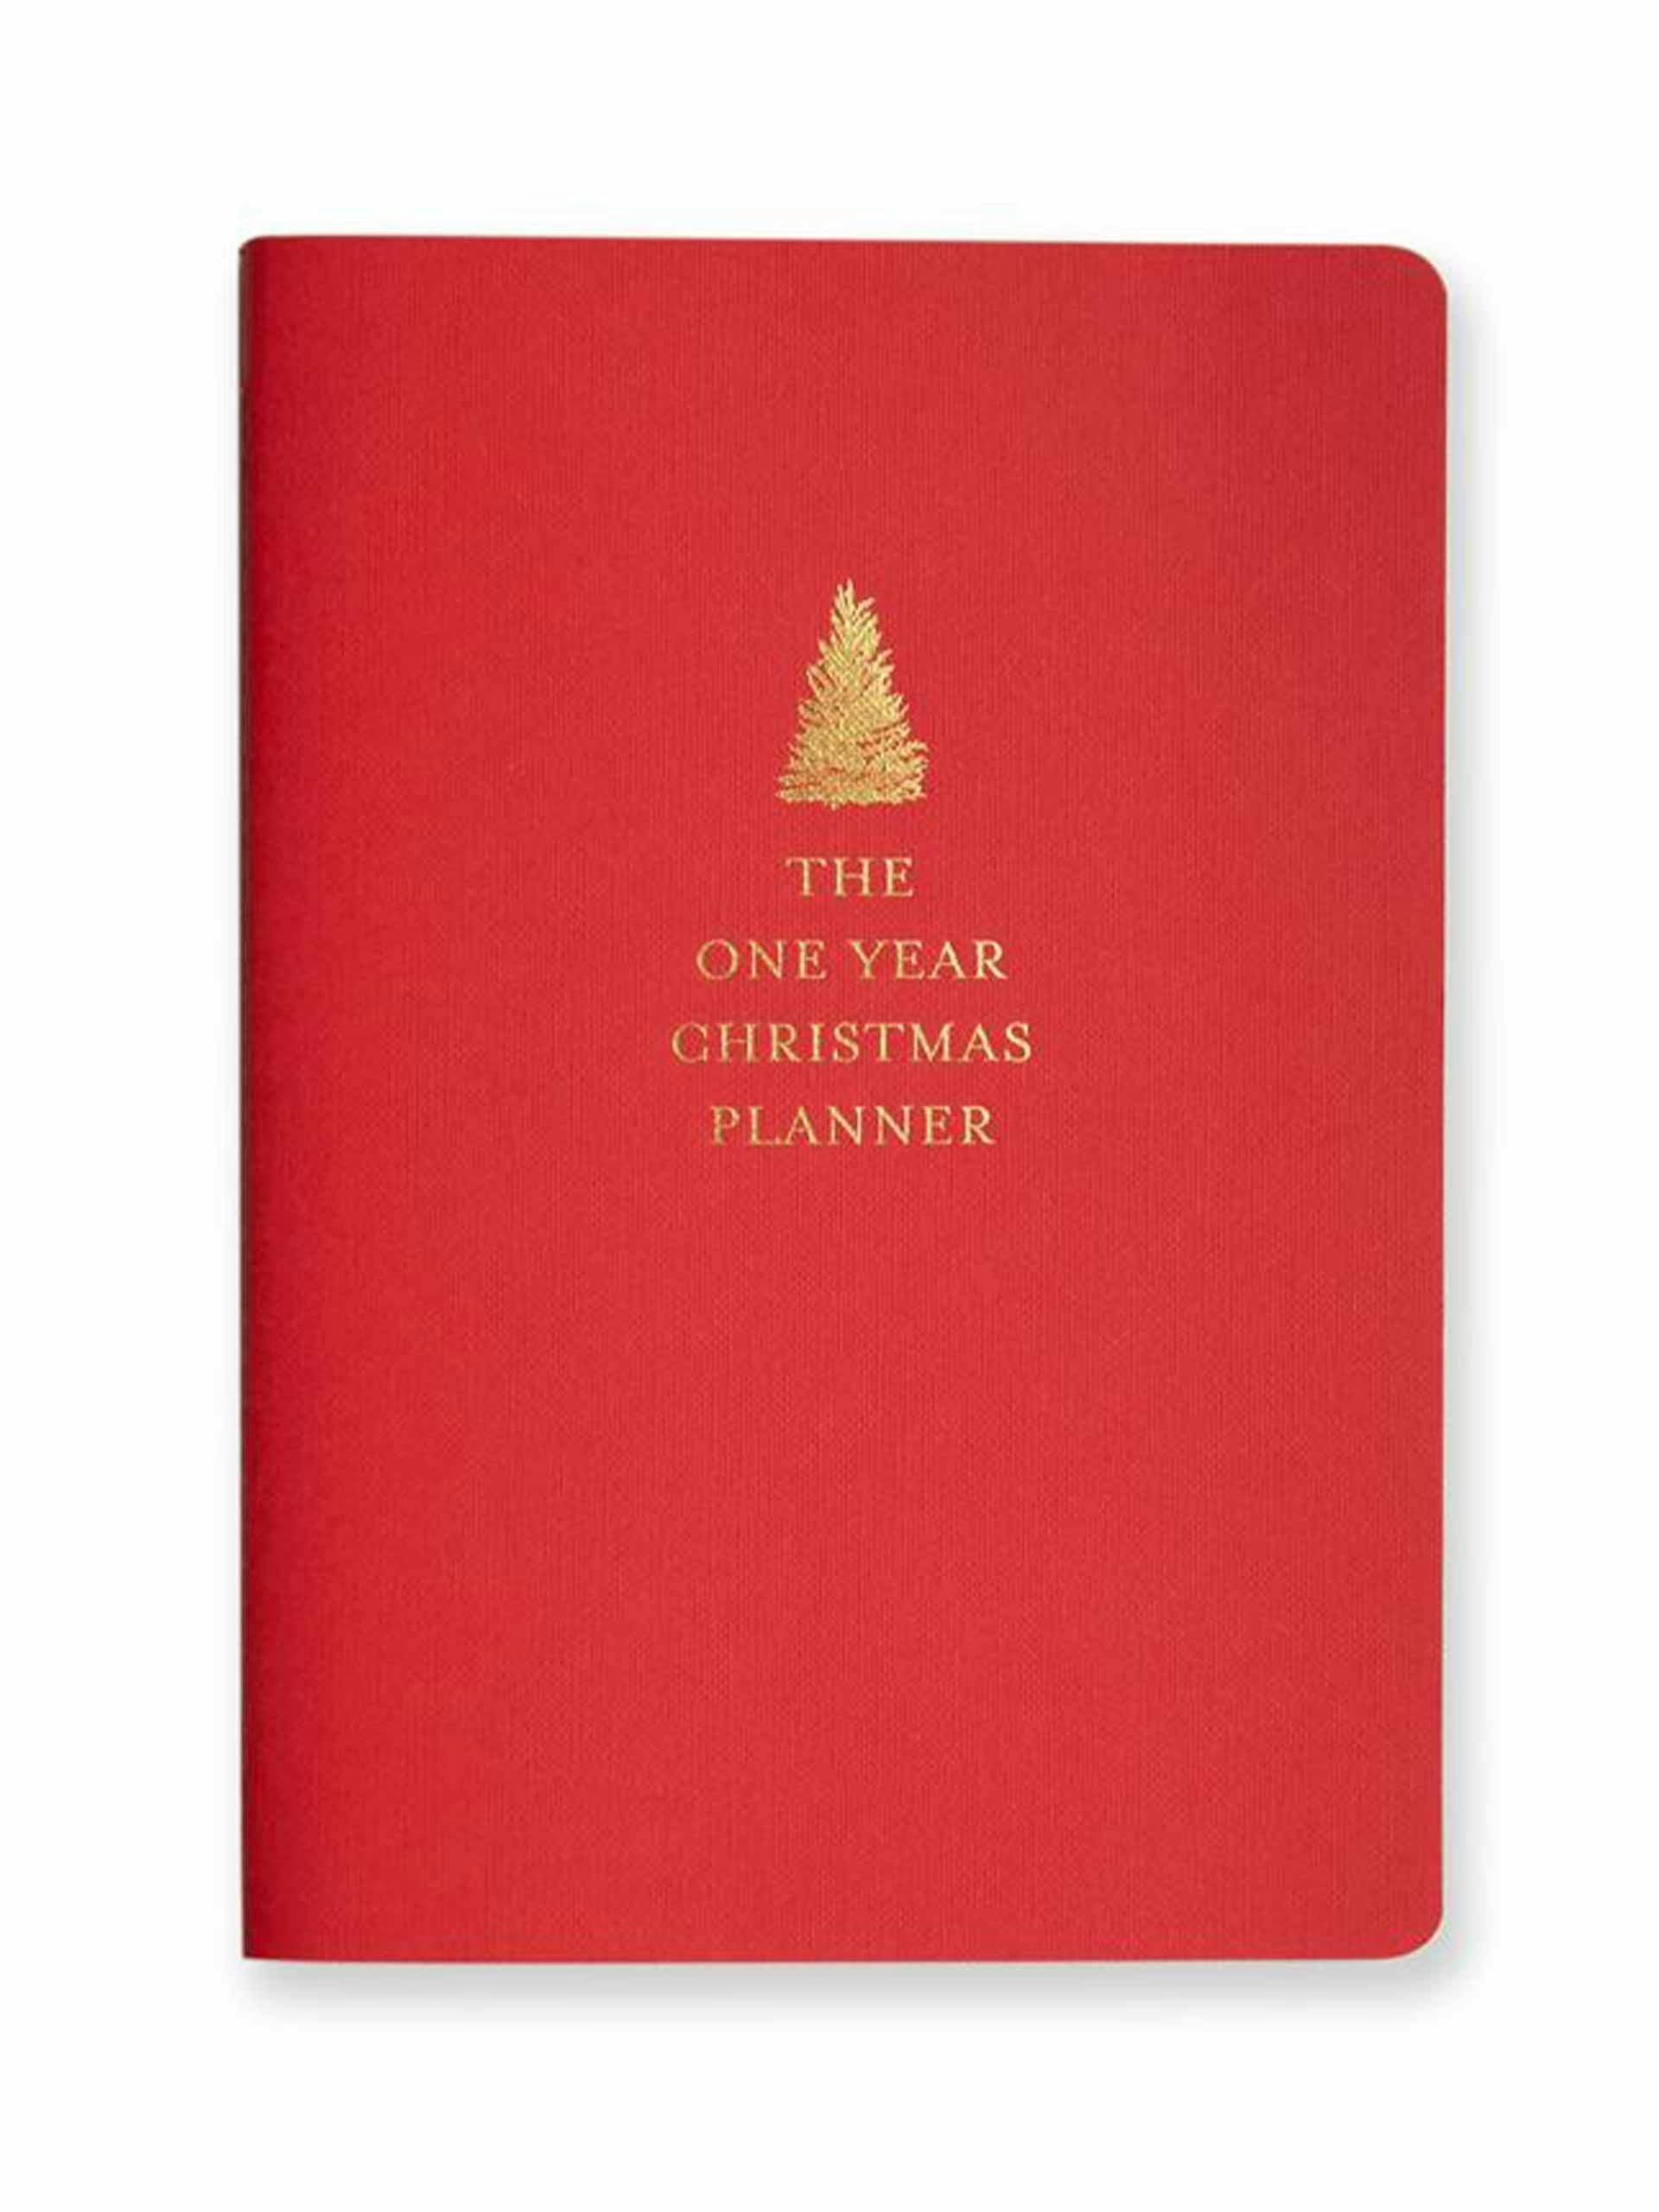 One year christmas planner